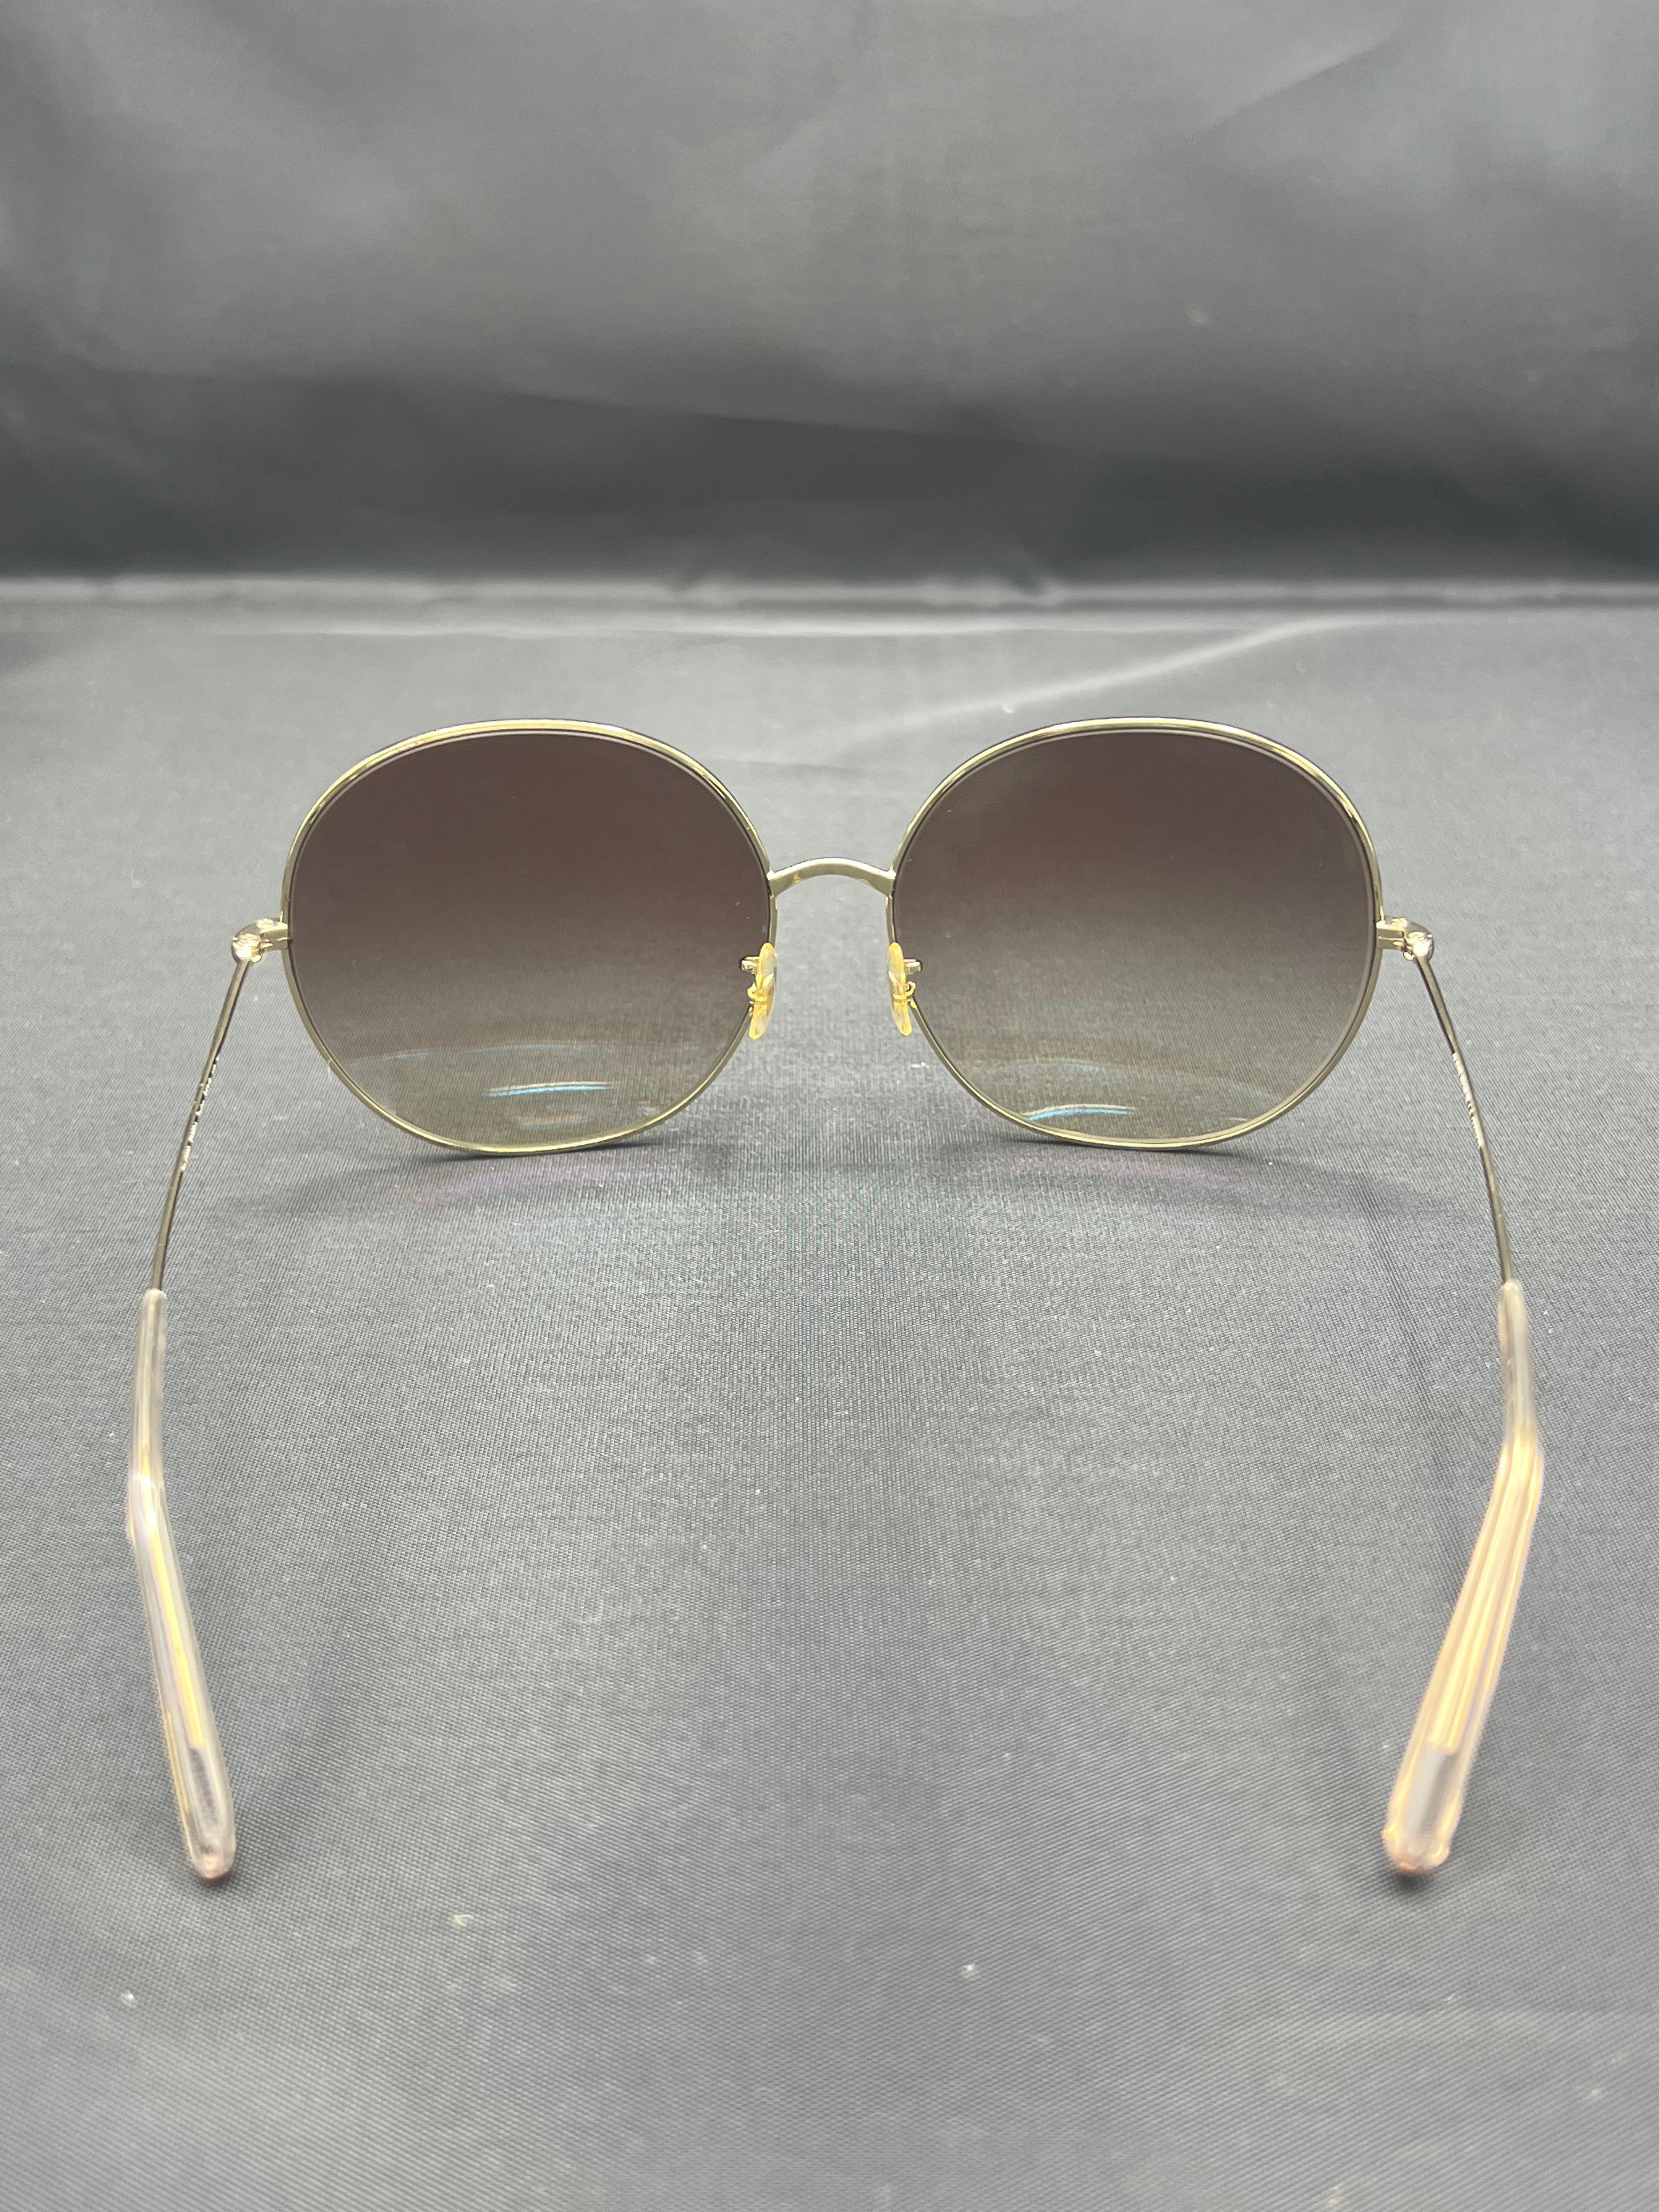 Oliver Peoples Darien Brown Round Sunglasses w/ Case In Excellent Condition For Sale In Beverly Hills, CA